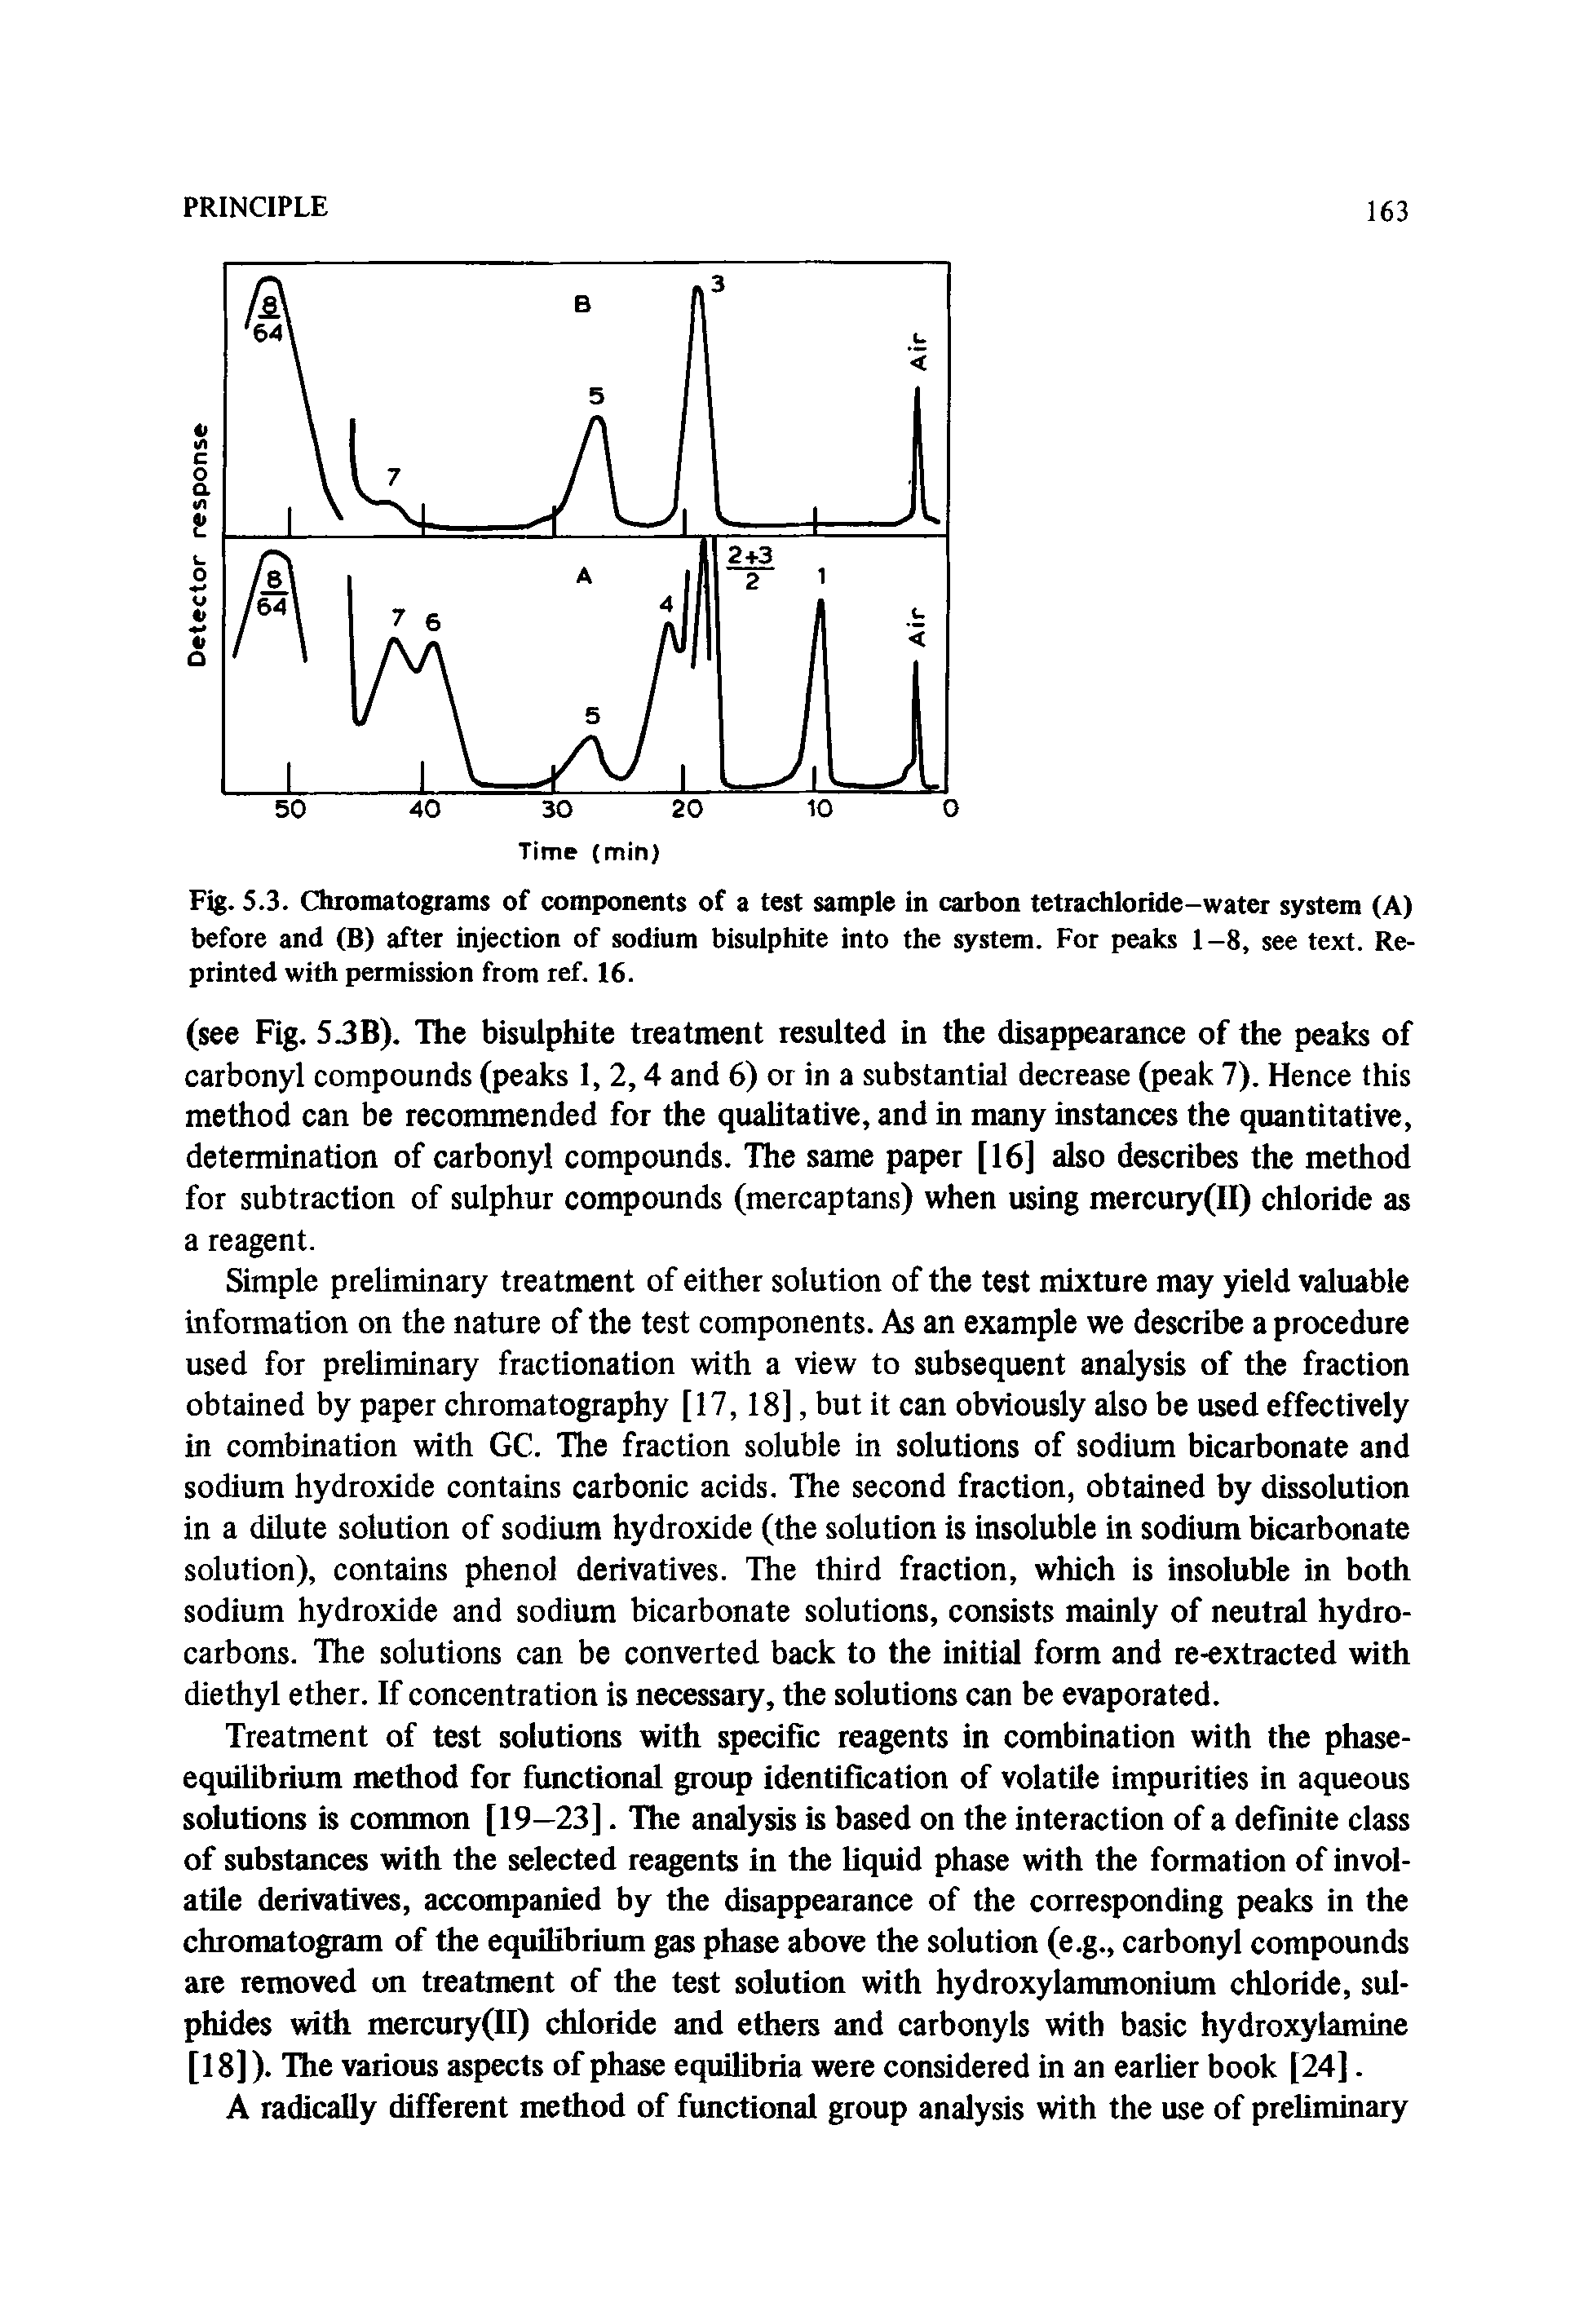 Fig. 5.3. Chromatograms of components of a test sample in carbon tetrachloride-water system (A) before and (B) after injection of sodium bisulphite into the system. For peaks 1-8, see text. Reprinted with permission from ref. 16.